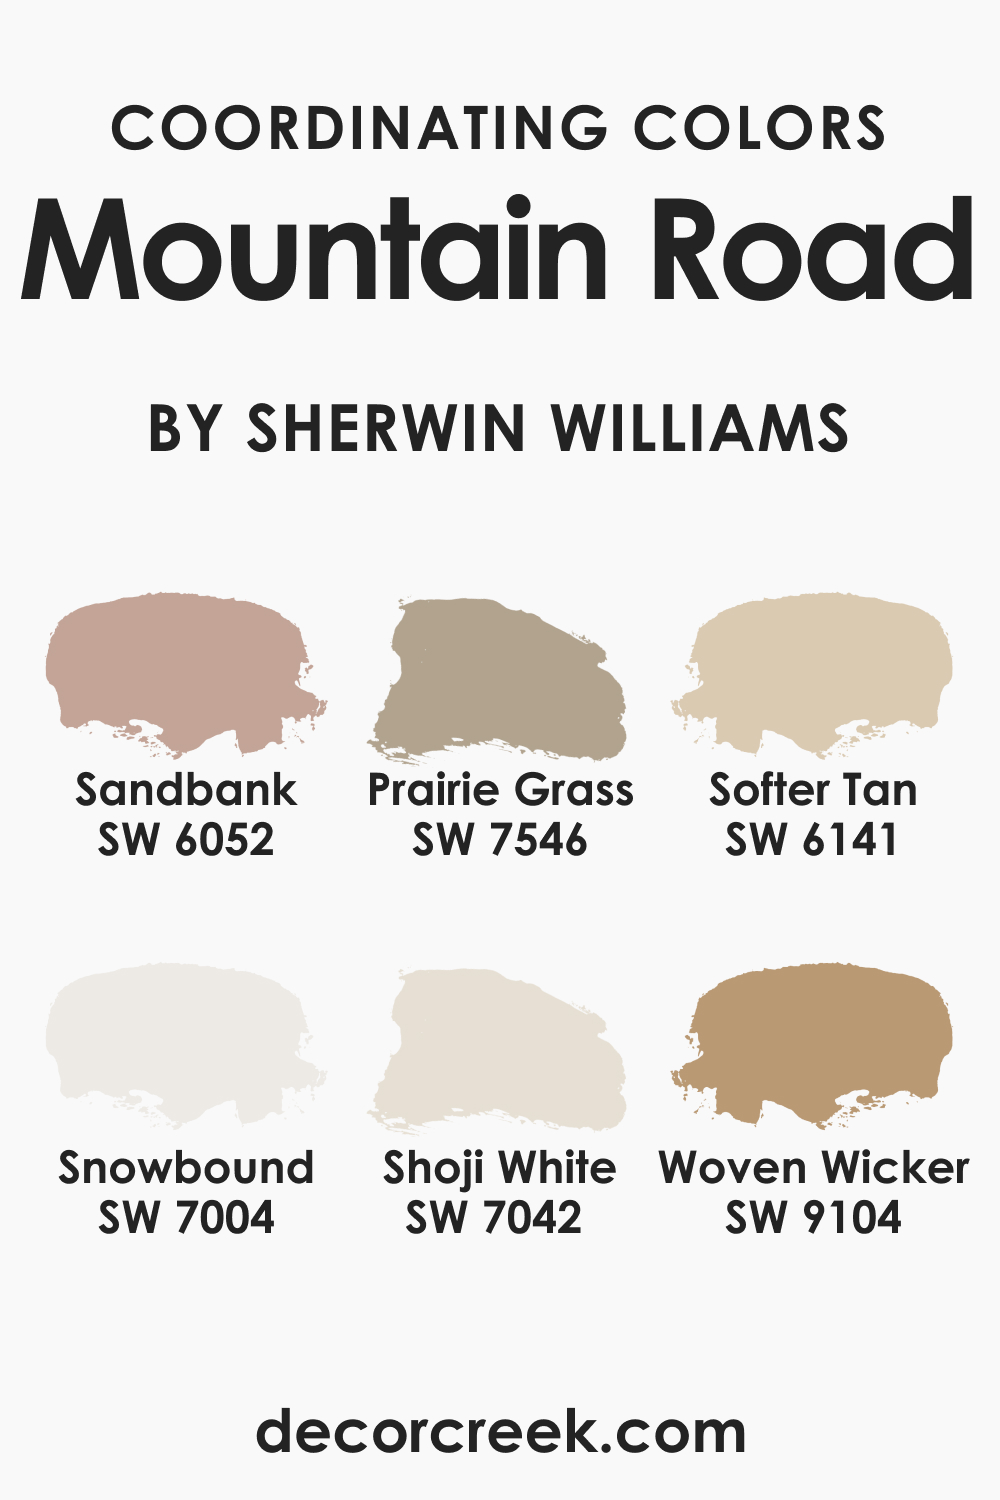 Coordinating Colors of SW 7743 Mountain Road